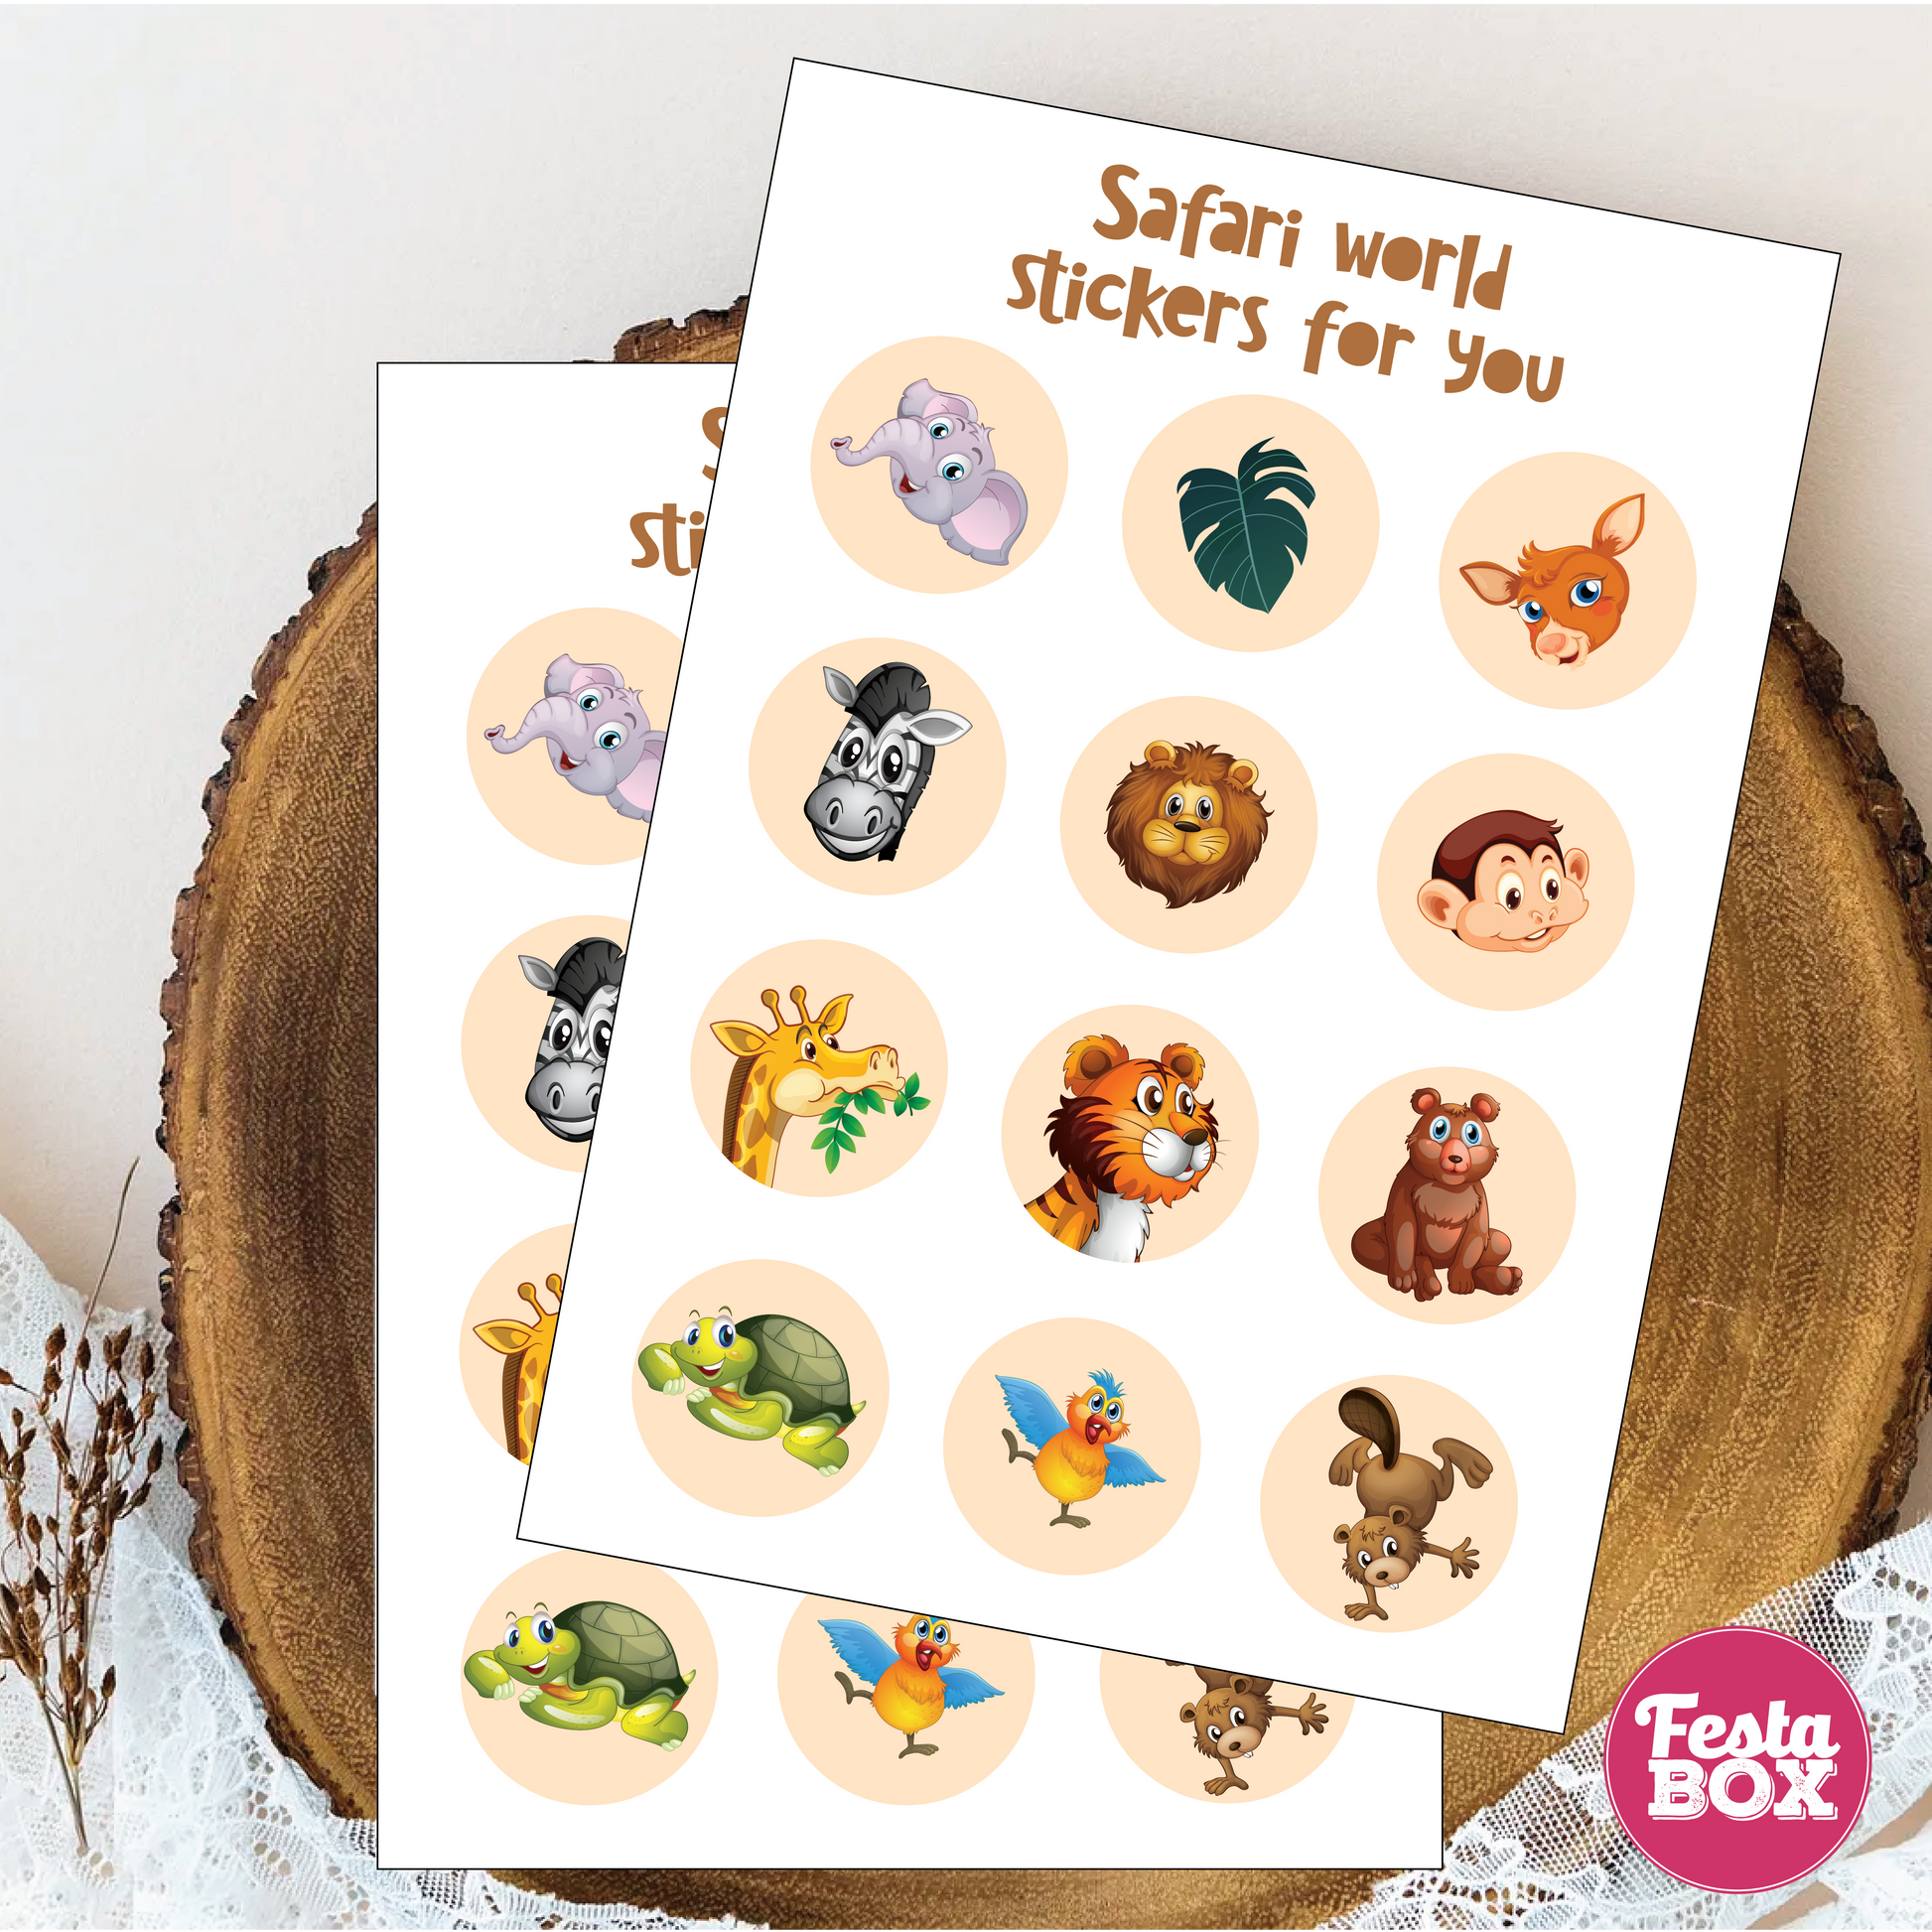 Sticker Sheets under Jungle Safari Birthday Party Theme Collection by Festabox